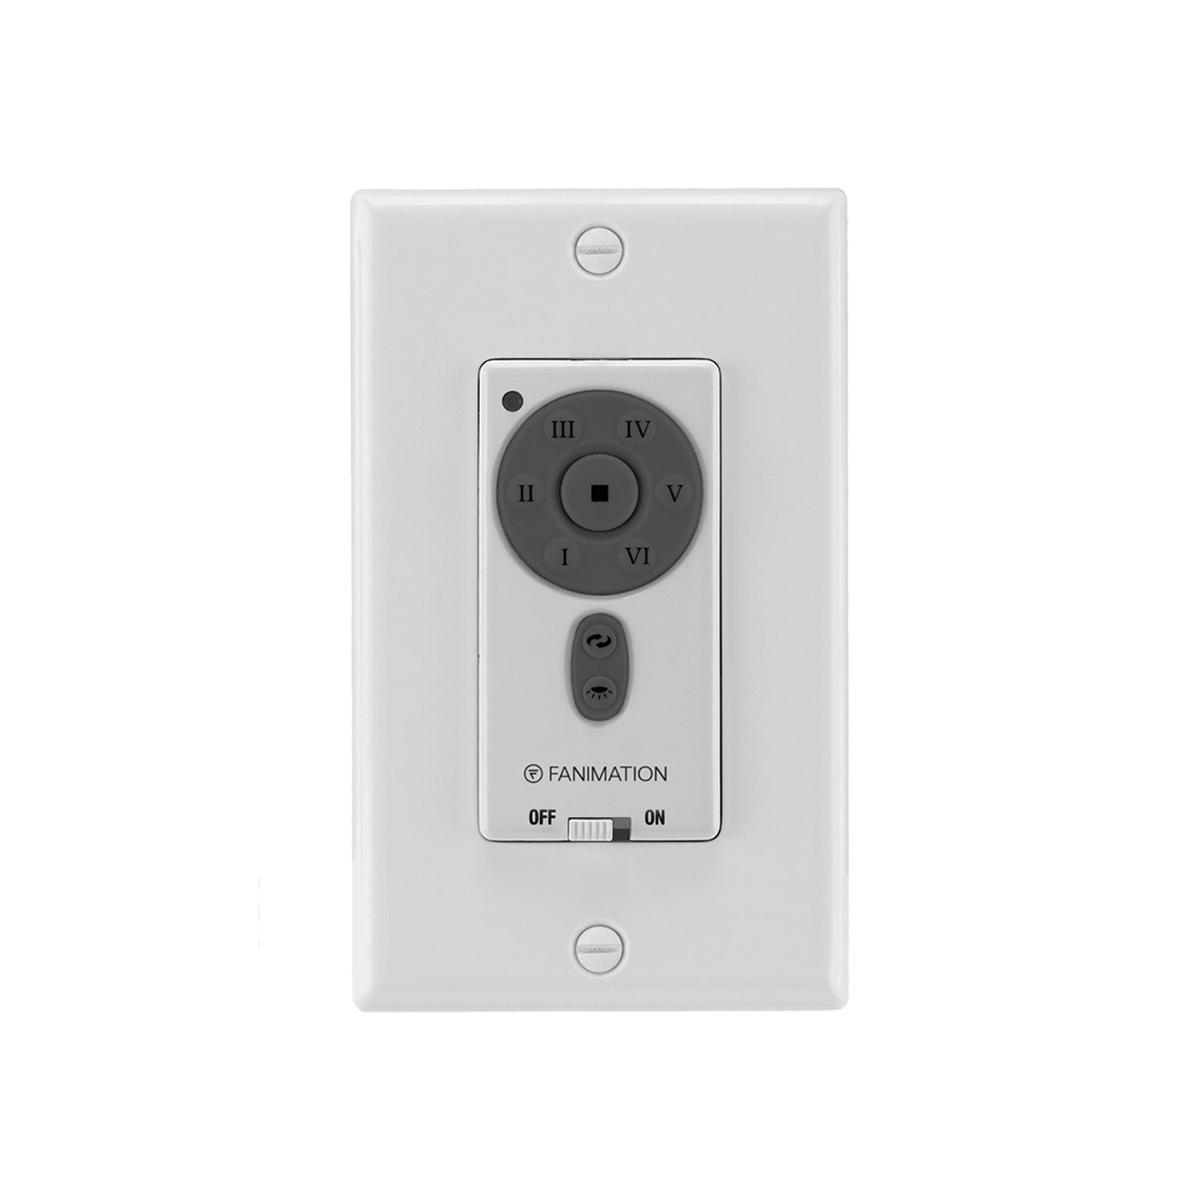 6-Speed DC Ceiling Fan And Light Wall Control, Reversing Switch, White And Dark Gray Finish - Bees Lighting